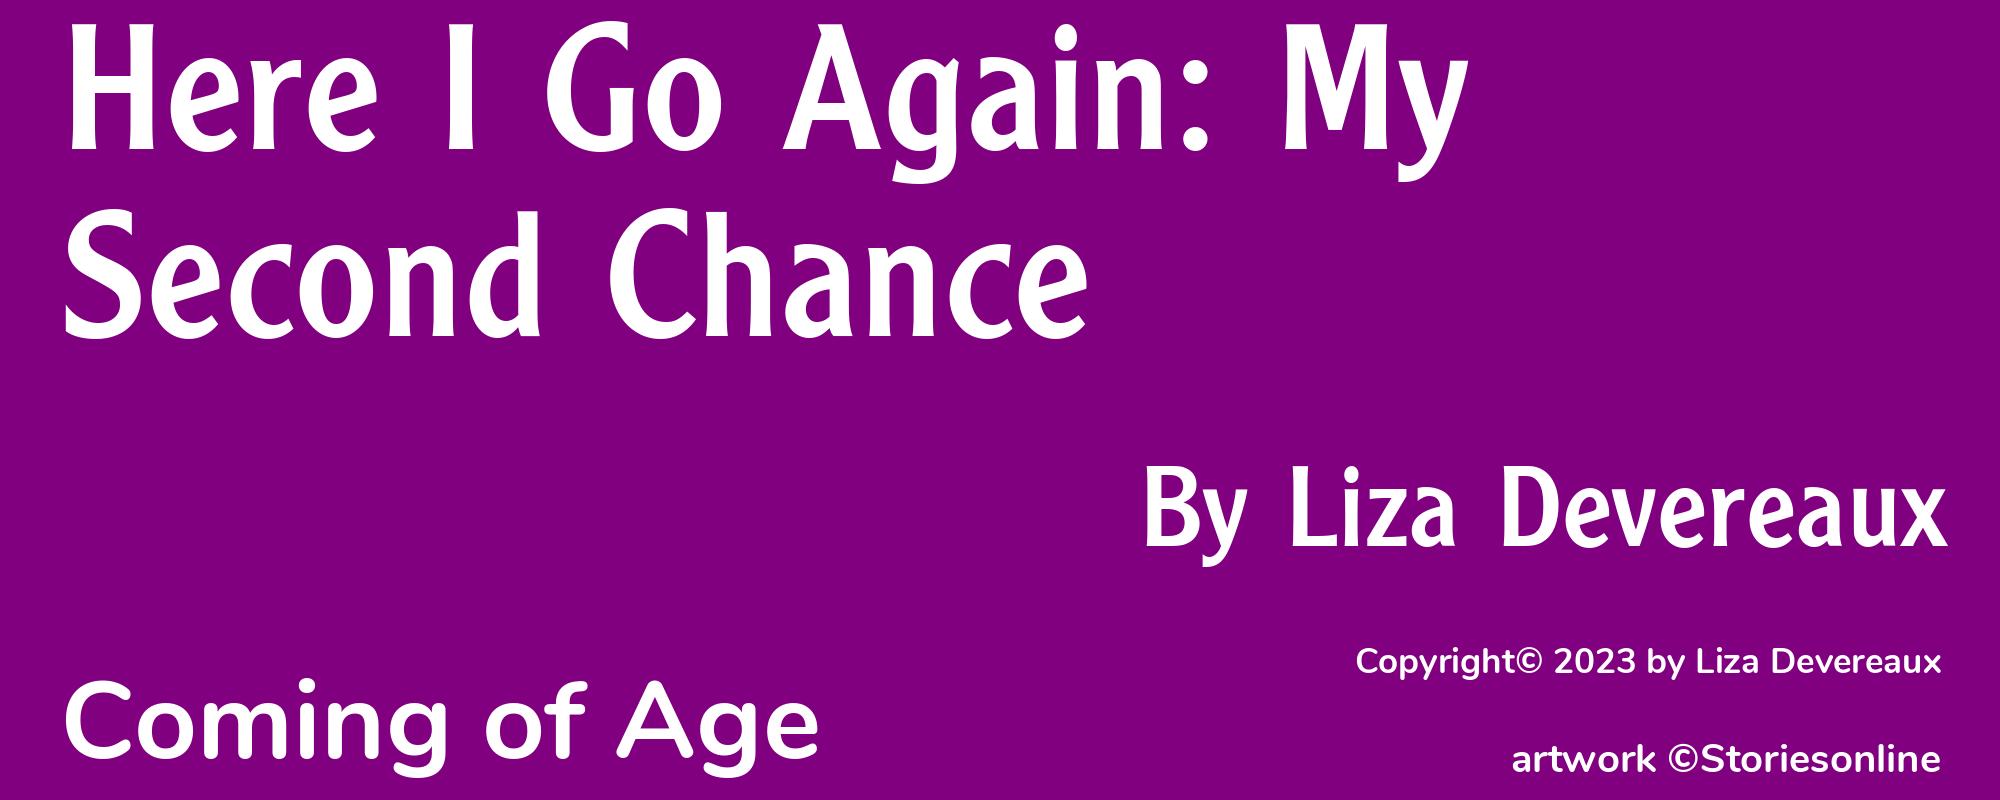 Here I Go Again: My Second Chance - Cover